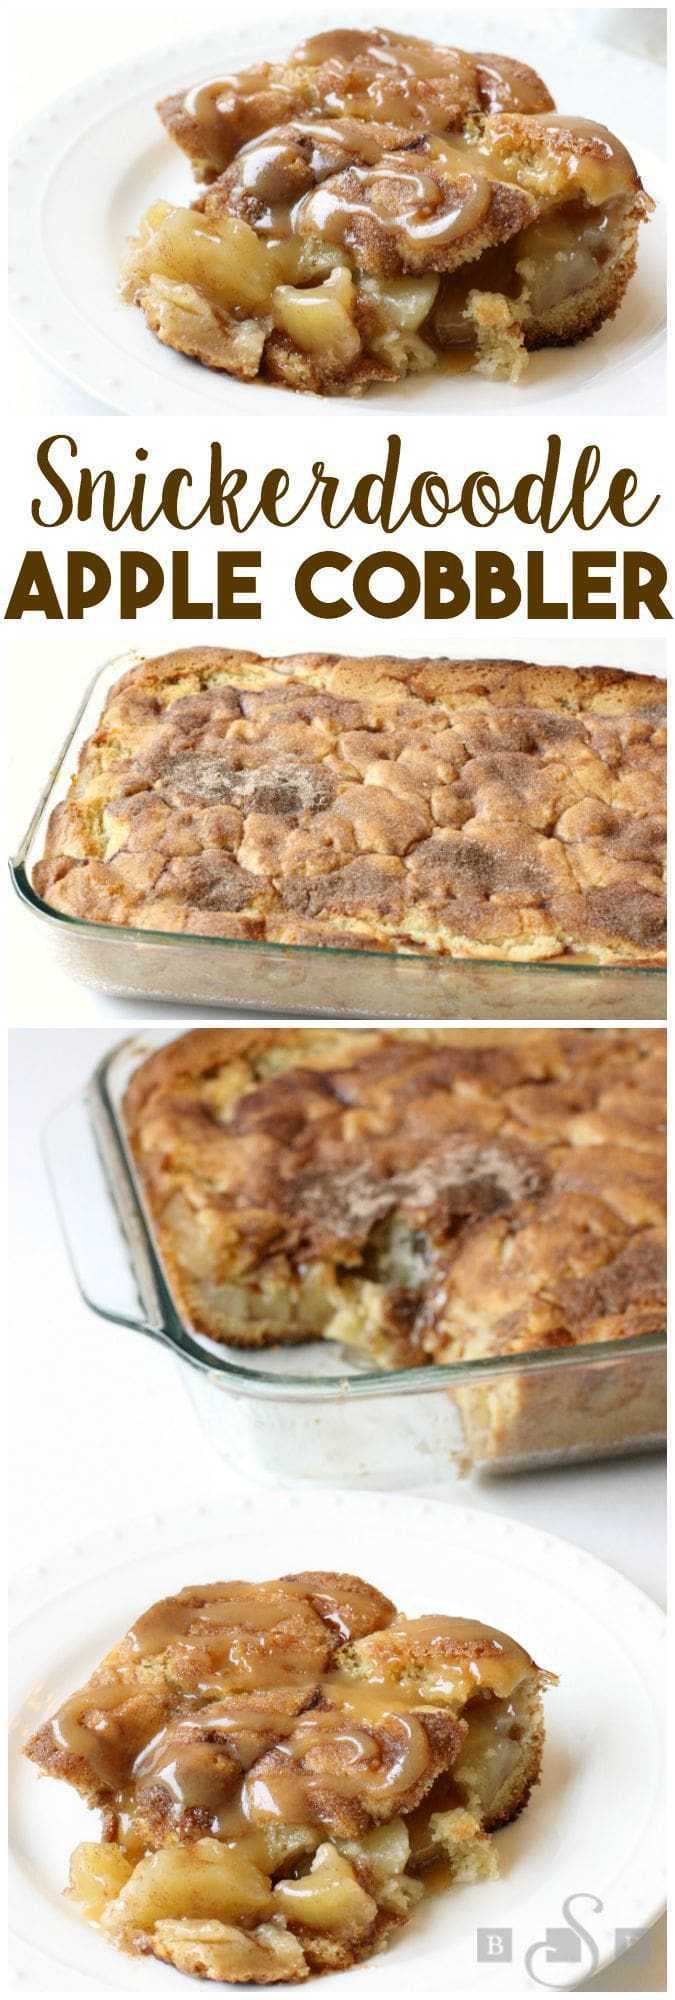 Snickerdoodle Apple Cobbler combines 2 favorite desserts into one! Cinnamon apple pie filling is baked inside snickerdoodle cookie dough, then topped with caramel. 